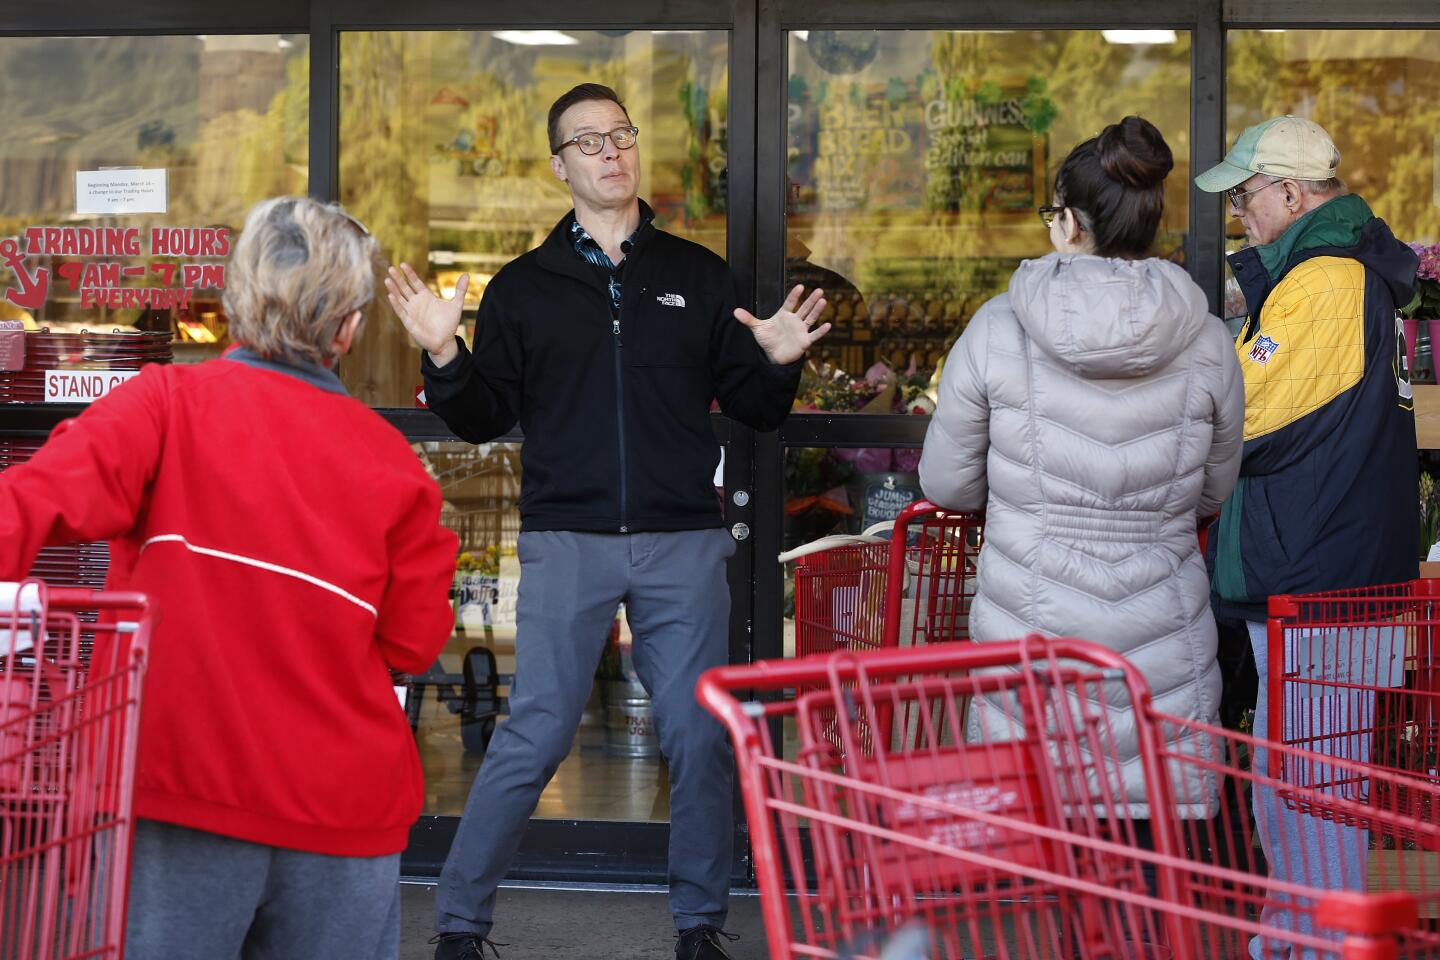 An employee of the Trader Joe's store in Monrovia tells customers waiting in line that it would open doors to everyone at 9 a.m., not just seniors, who arrived believing doors would open earlier to older residents, as some of the people were told by employees and it was reported. Some grocery outlets were offering special morning hours of shopping to accommodate older residents.